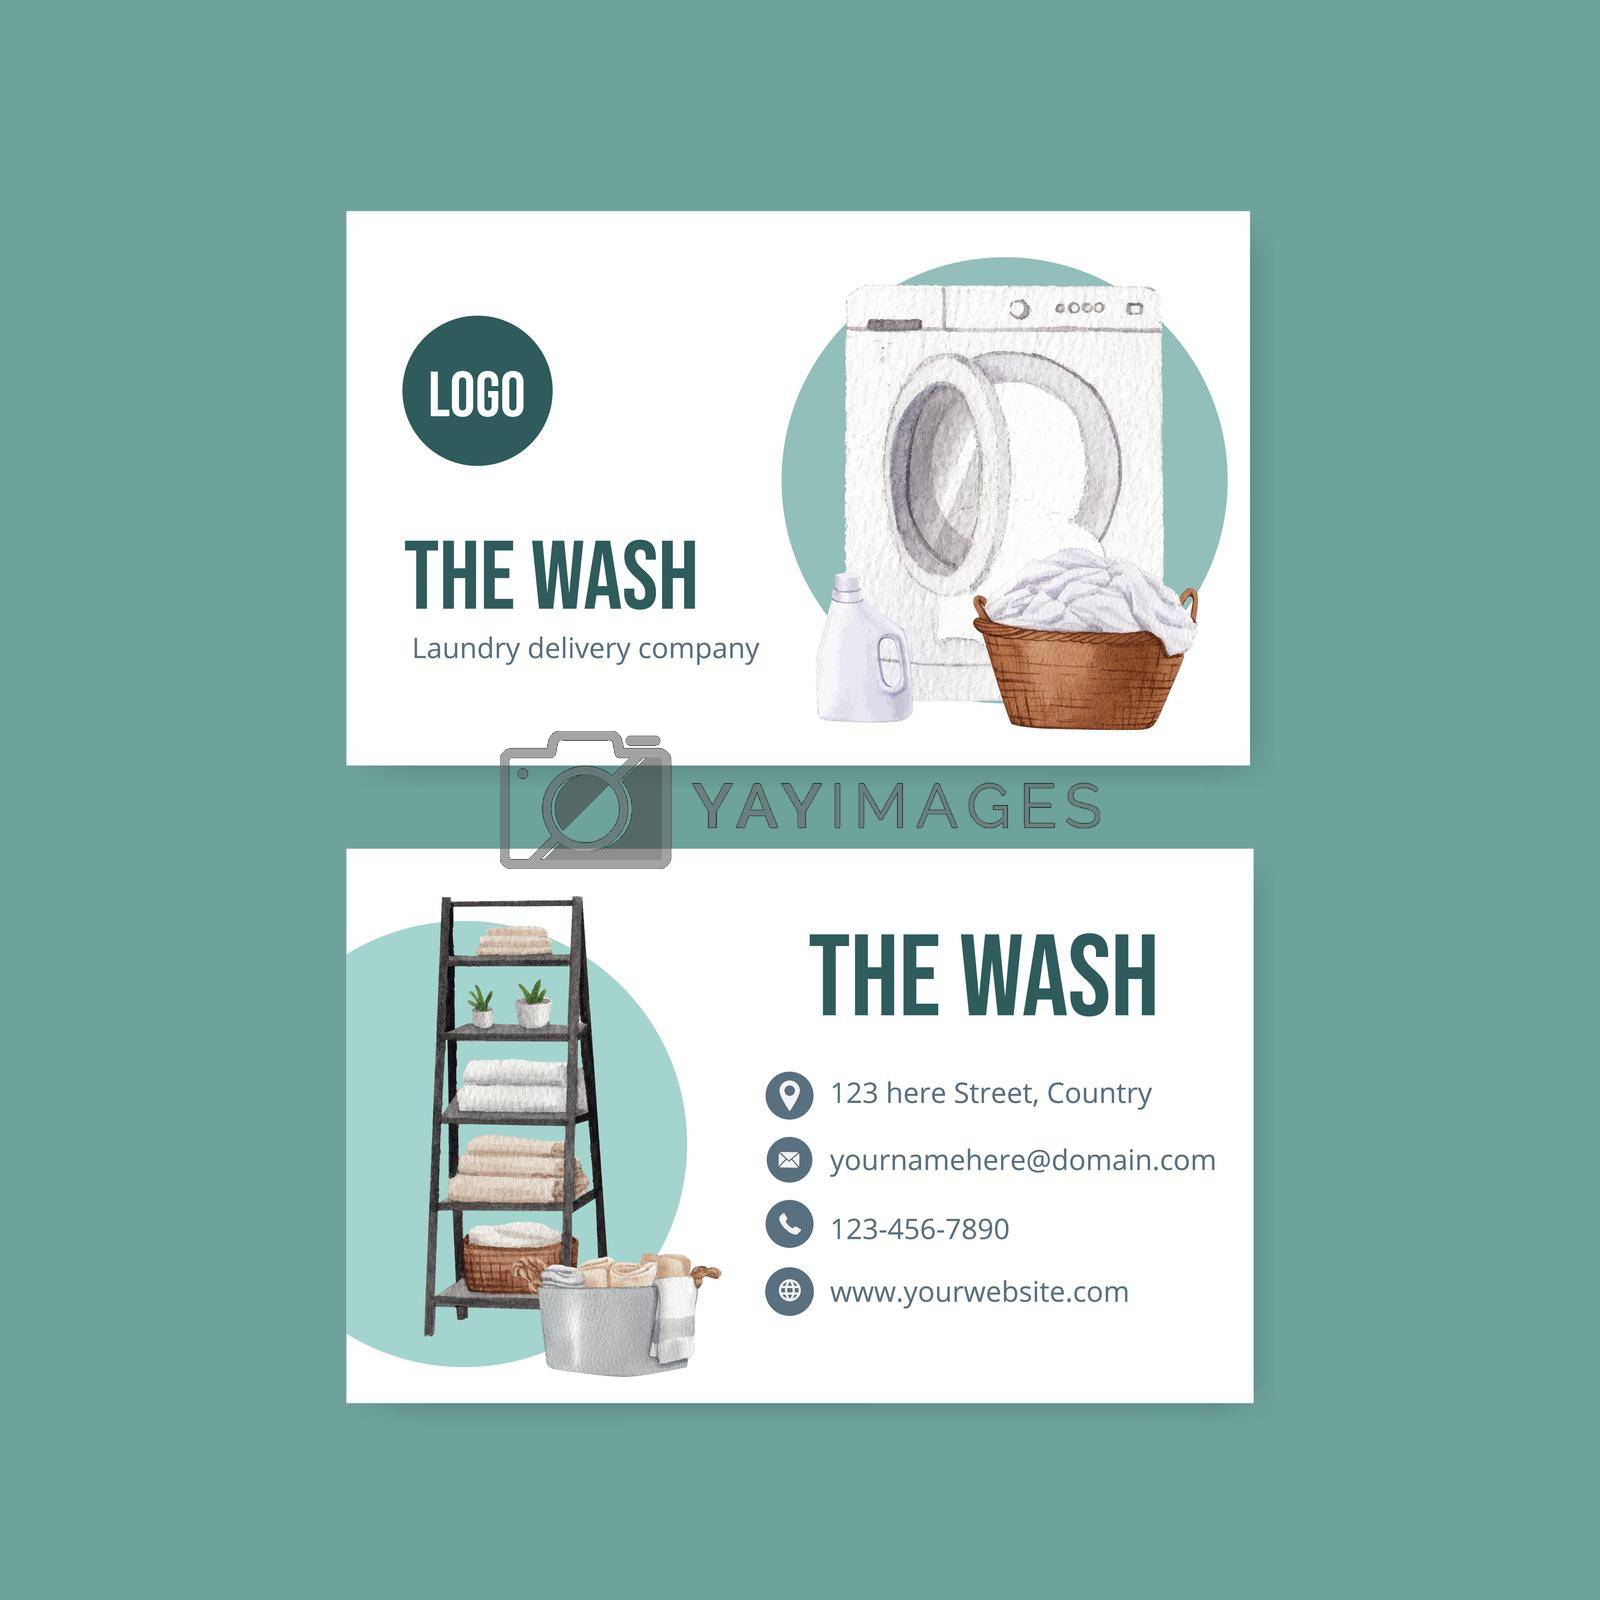 Royalty free image of Name card template with laundry day concept,watercolor style by Photographeeasia